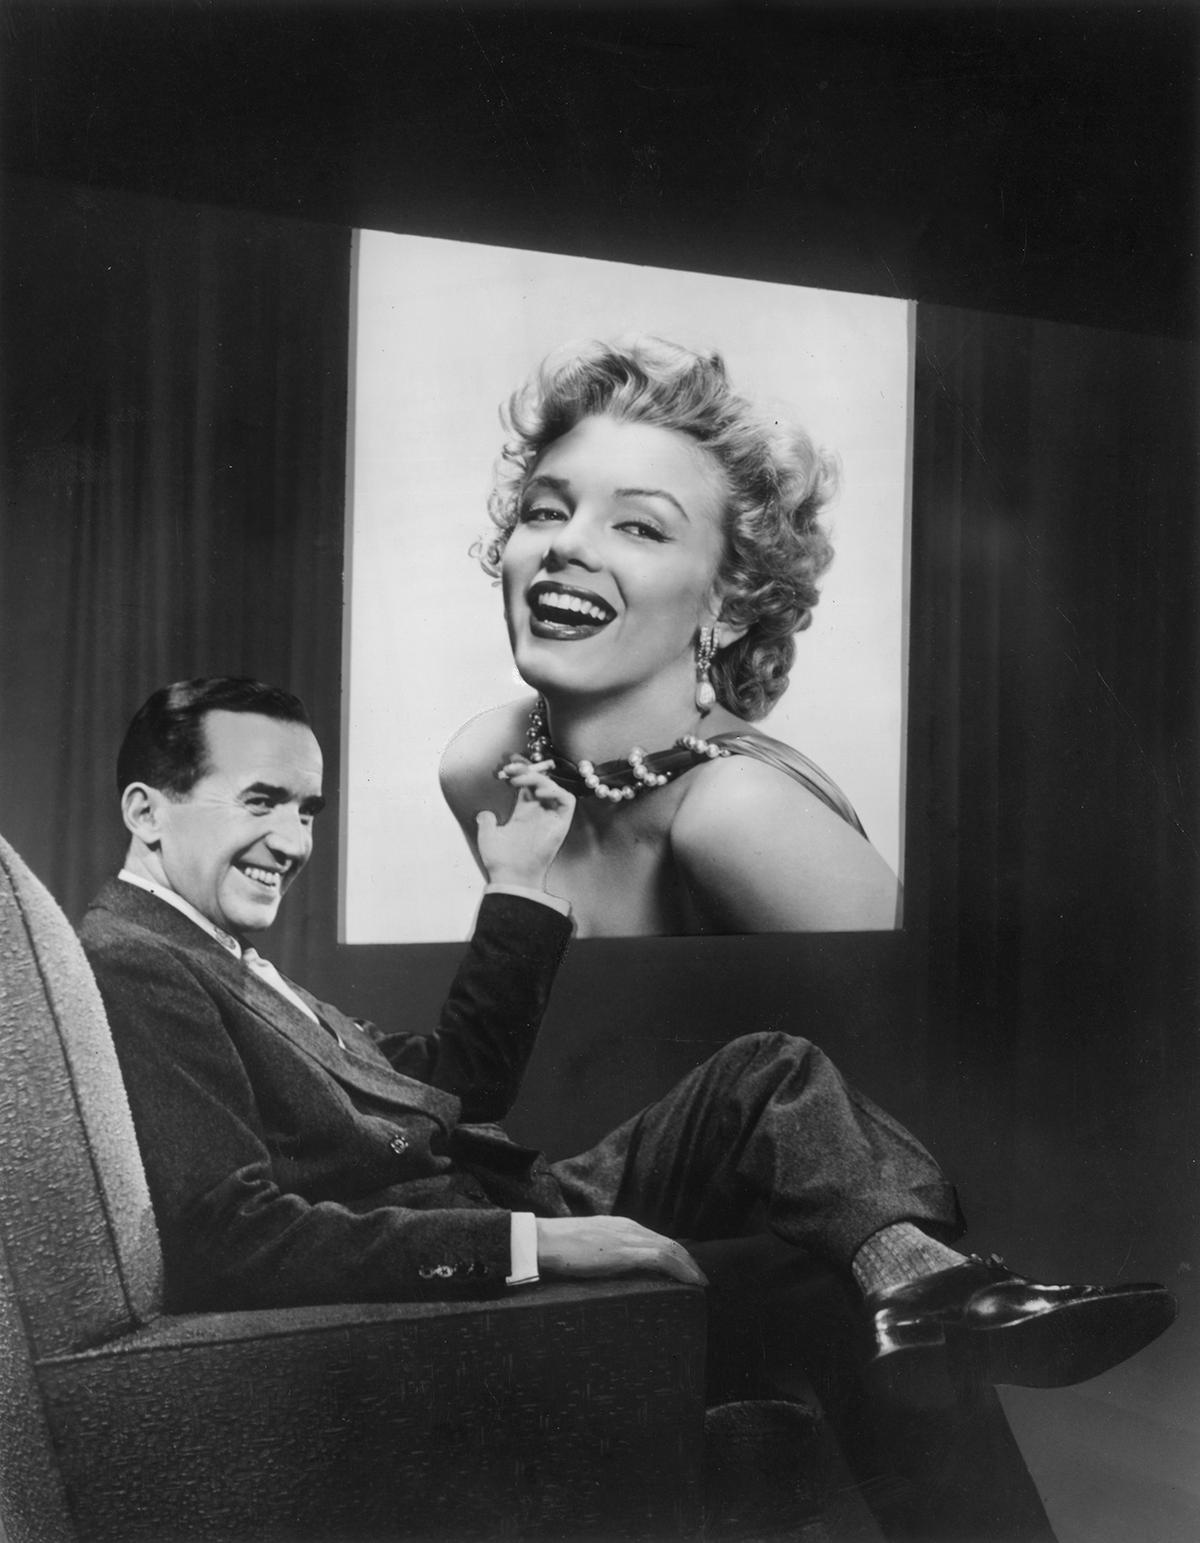 American broadcast journalist Edward R. Murrow points to an image of Marilyn Monroe who was scheduled for a television interview on '"Person to Person," 1955. (Hulton Archive/Getty Images)